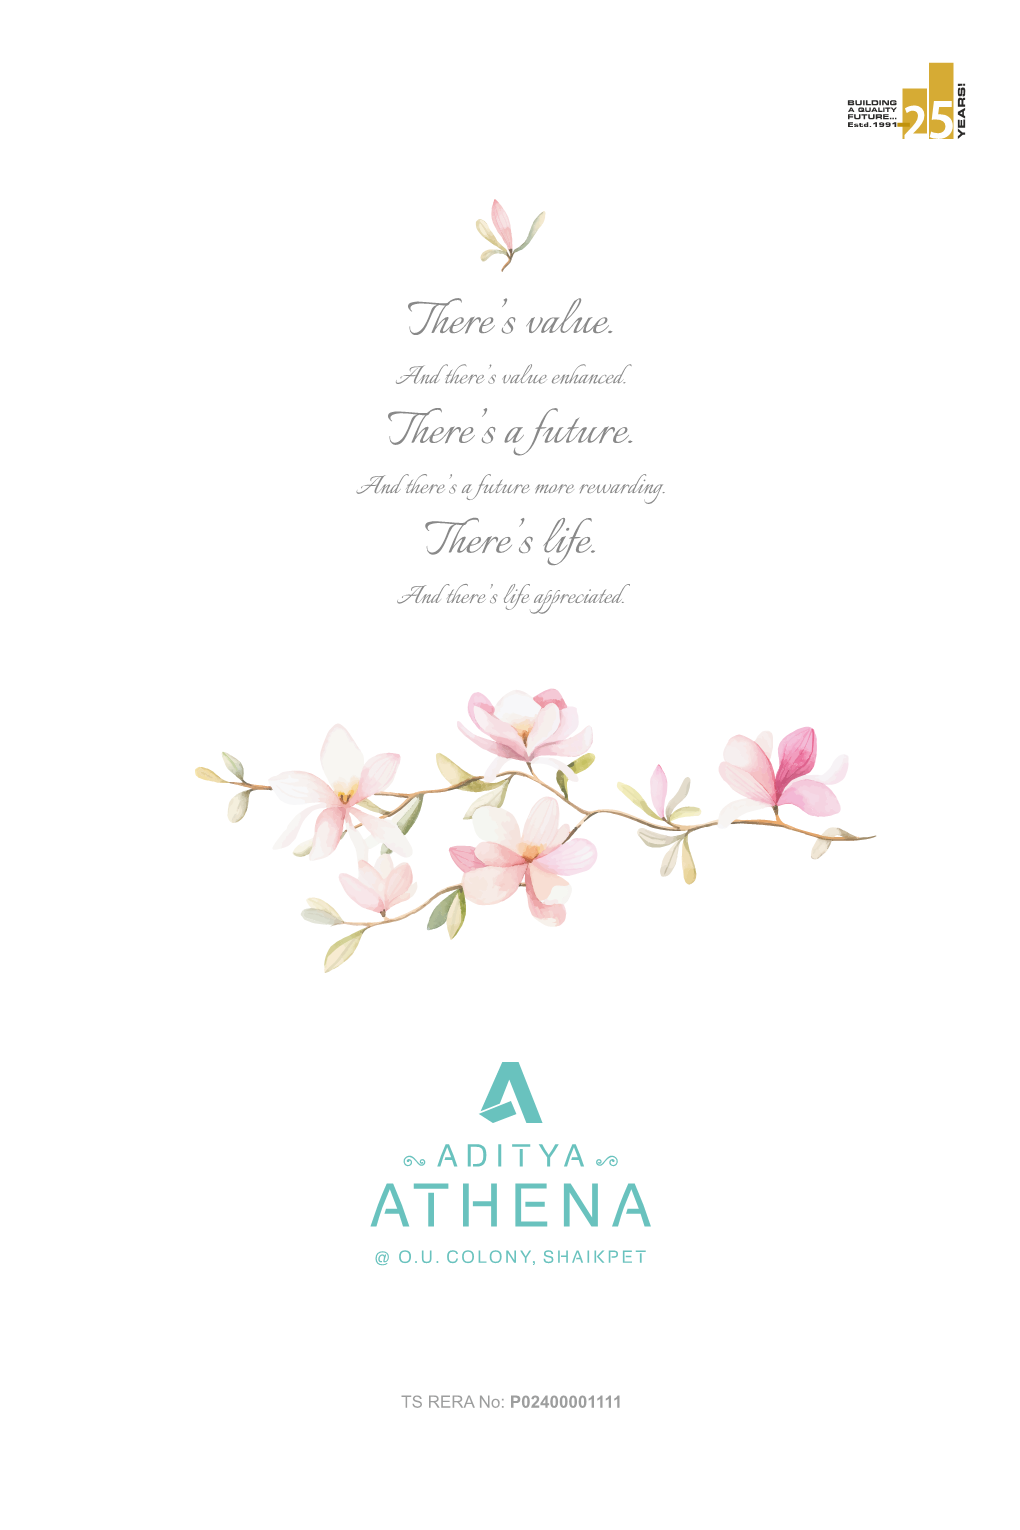 Athena, Mundane Is an Outdated Word